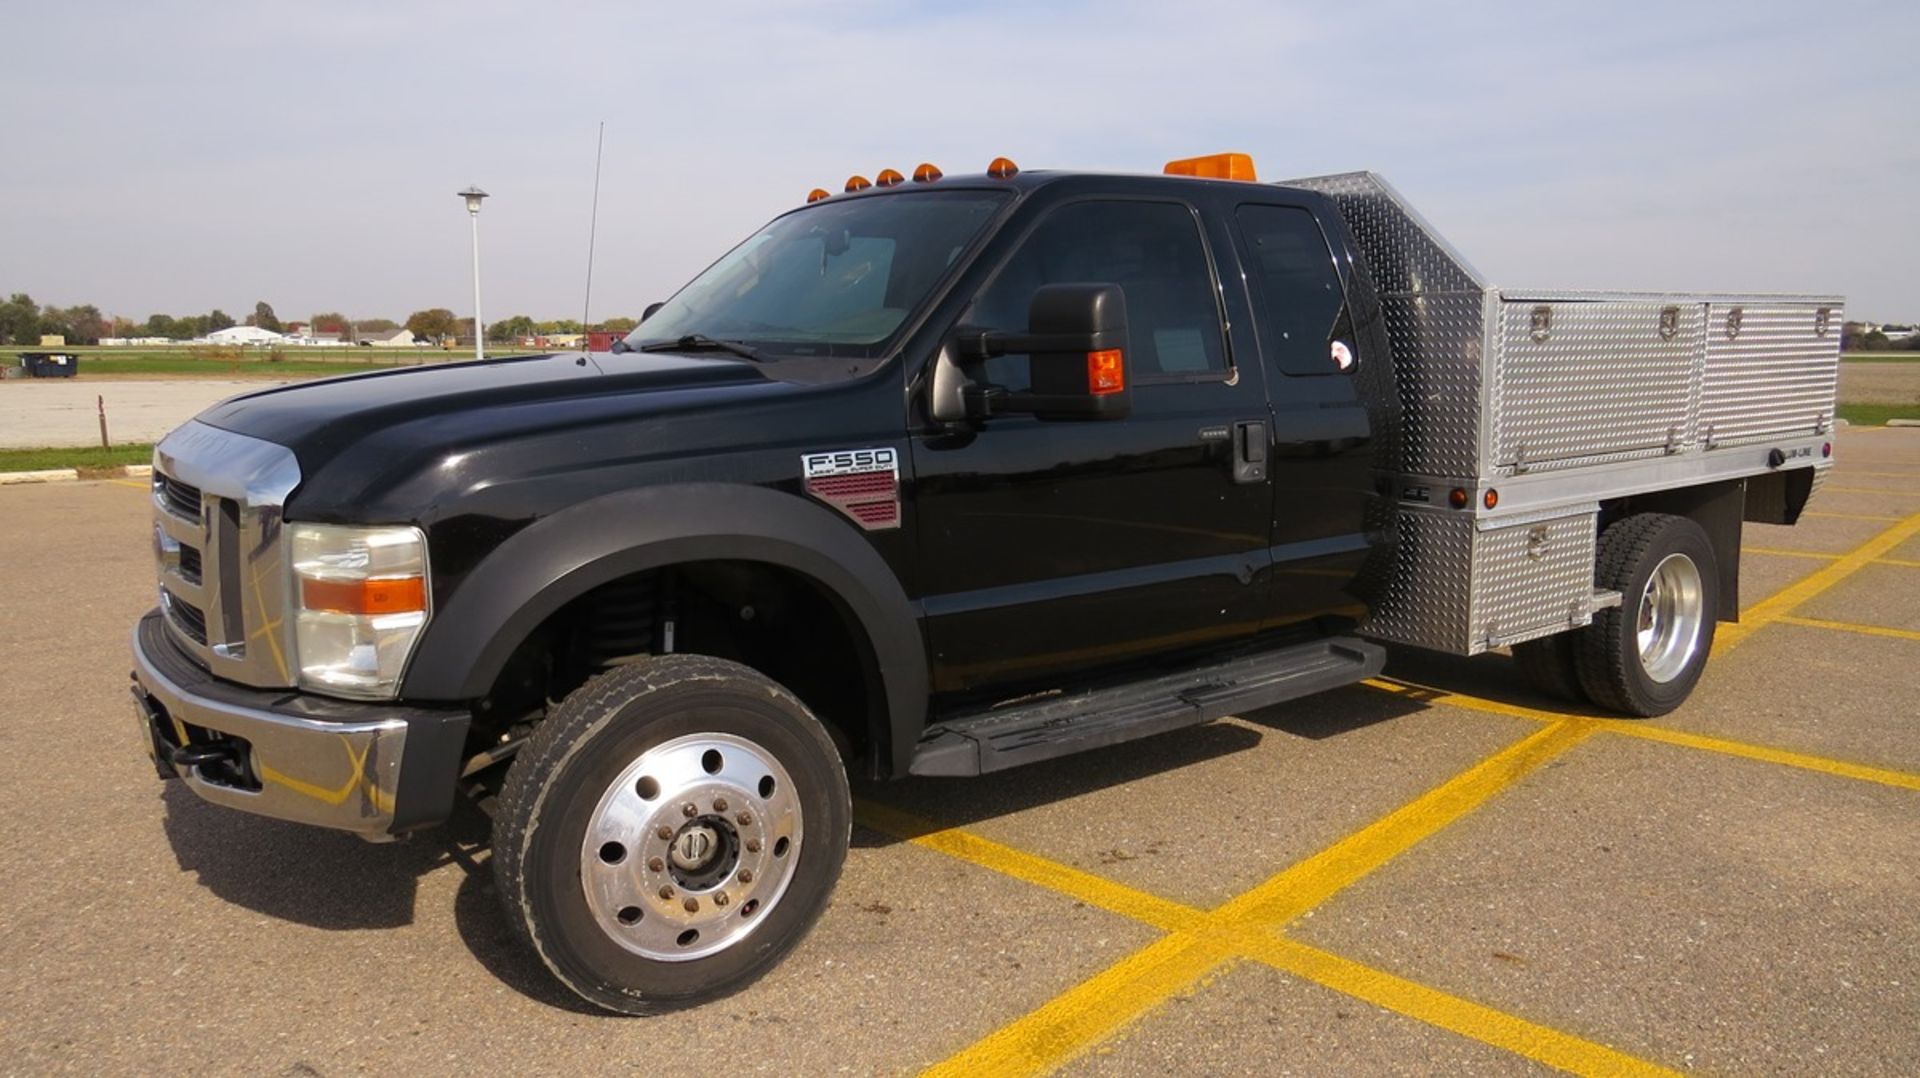 2008 Ford Model F-550 Lariat Extended Cab 4x4 Diesel 1-Ton Dually Pickup, VIN# ED26416, 6.4 Liter - Image 2 of 43